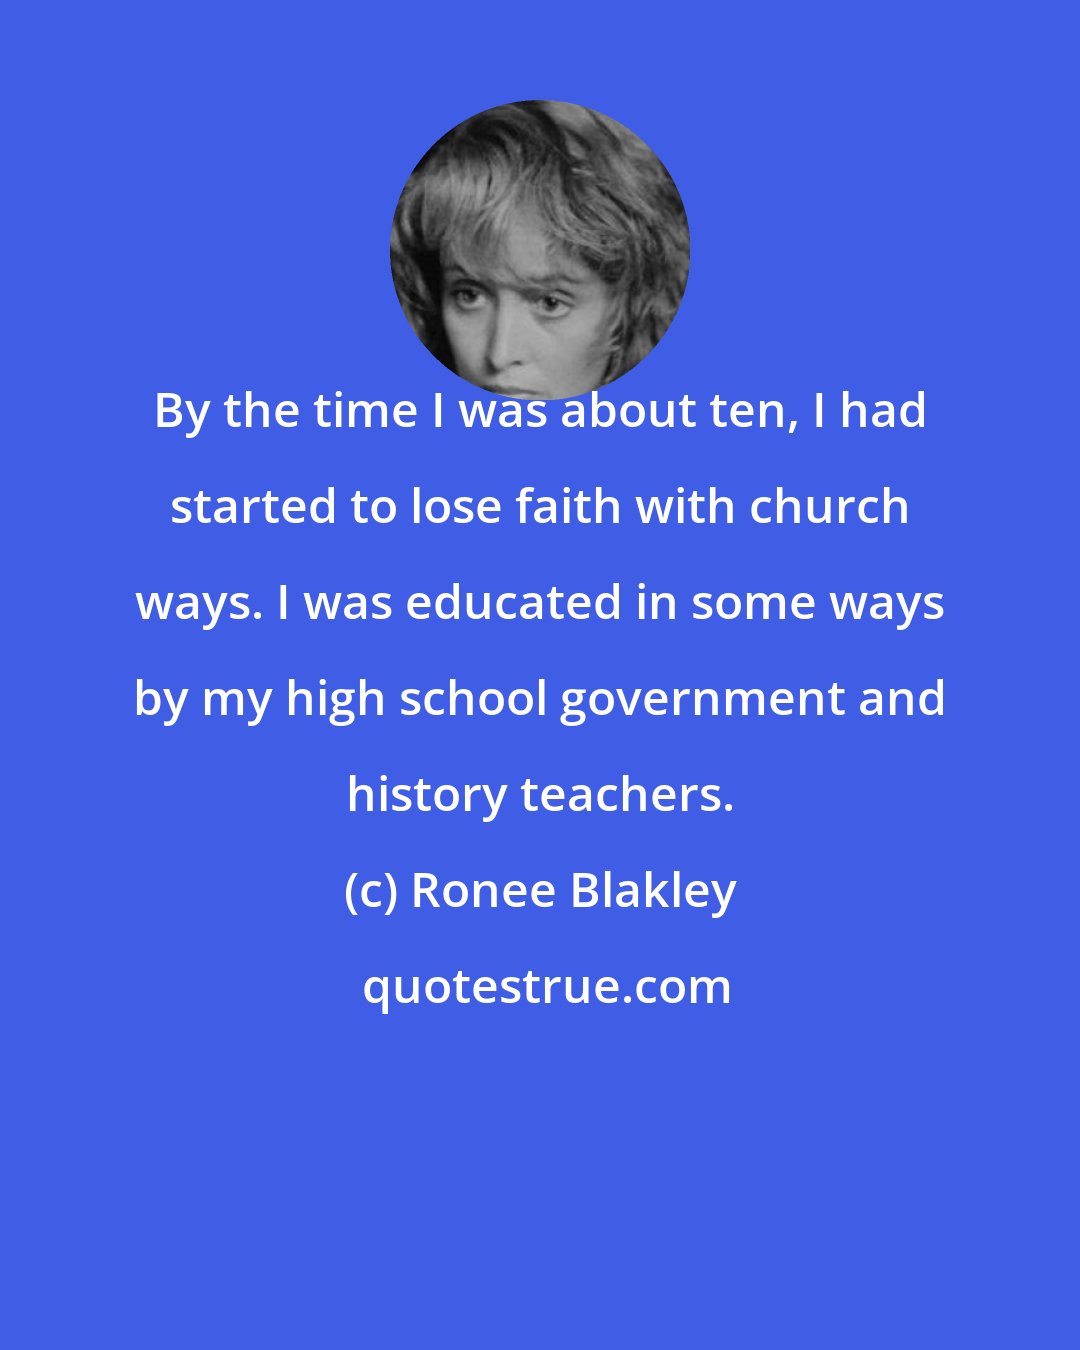 Ronee Blakley: By the time I was about ten, I had started to lose faith with church ways. I was educated in some ways by my high school government and history teachers.